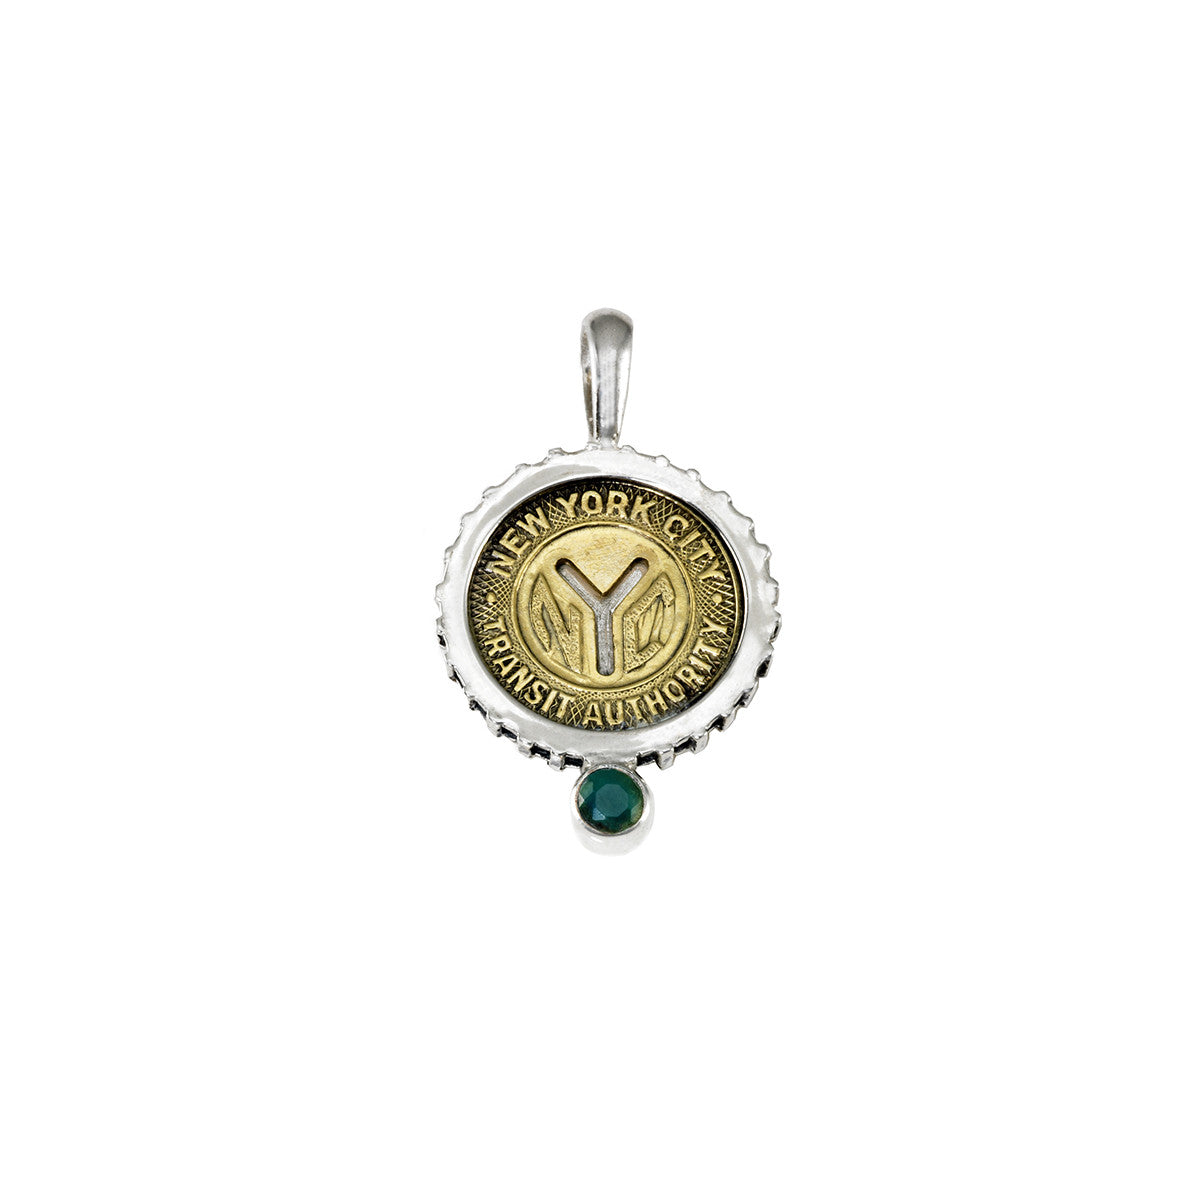 May NYC Authentic Subway Token Green Quartz Sterling Silver Charm Necklace - Cynthia Gale New York - 1